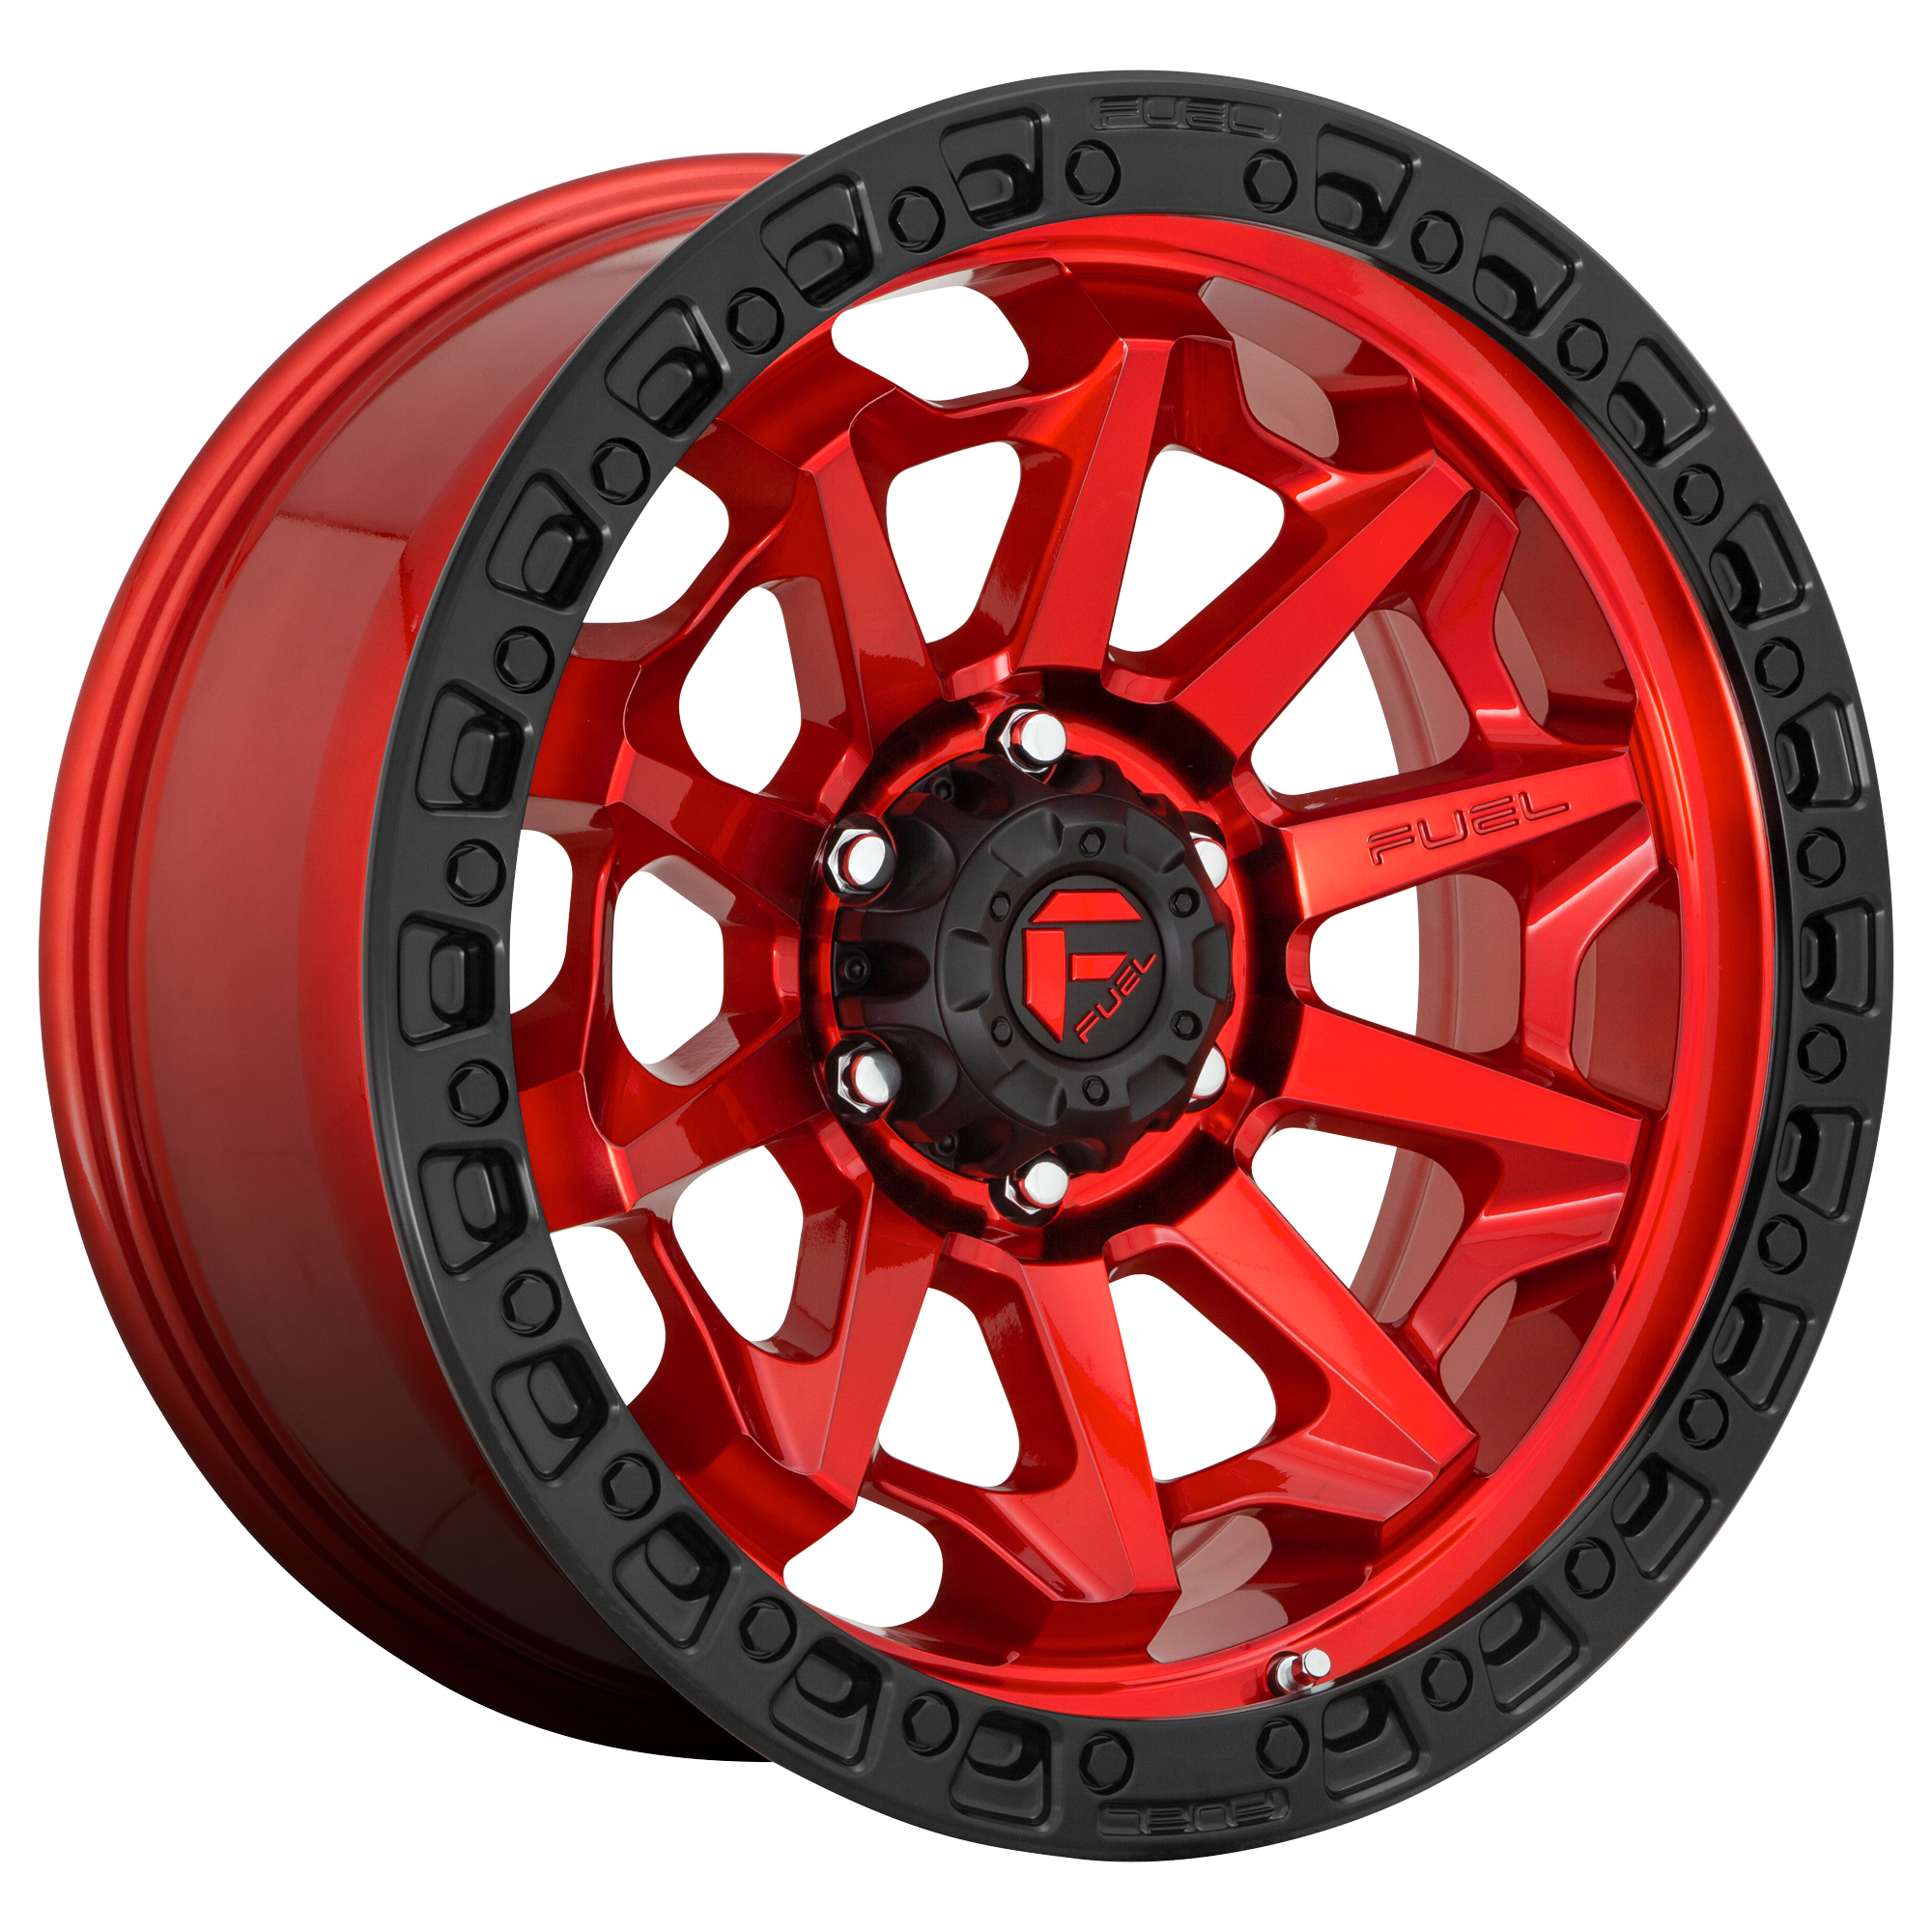 COVERT 17x9 5x127.00 CANDY RED BLACK BEAD RING (-12 mm) - Tires and Engine Performance